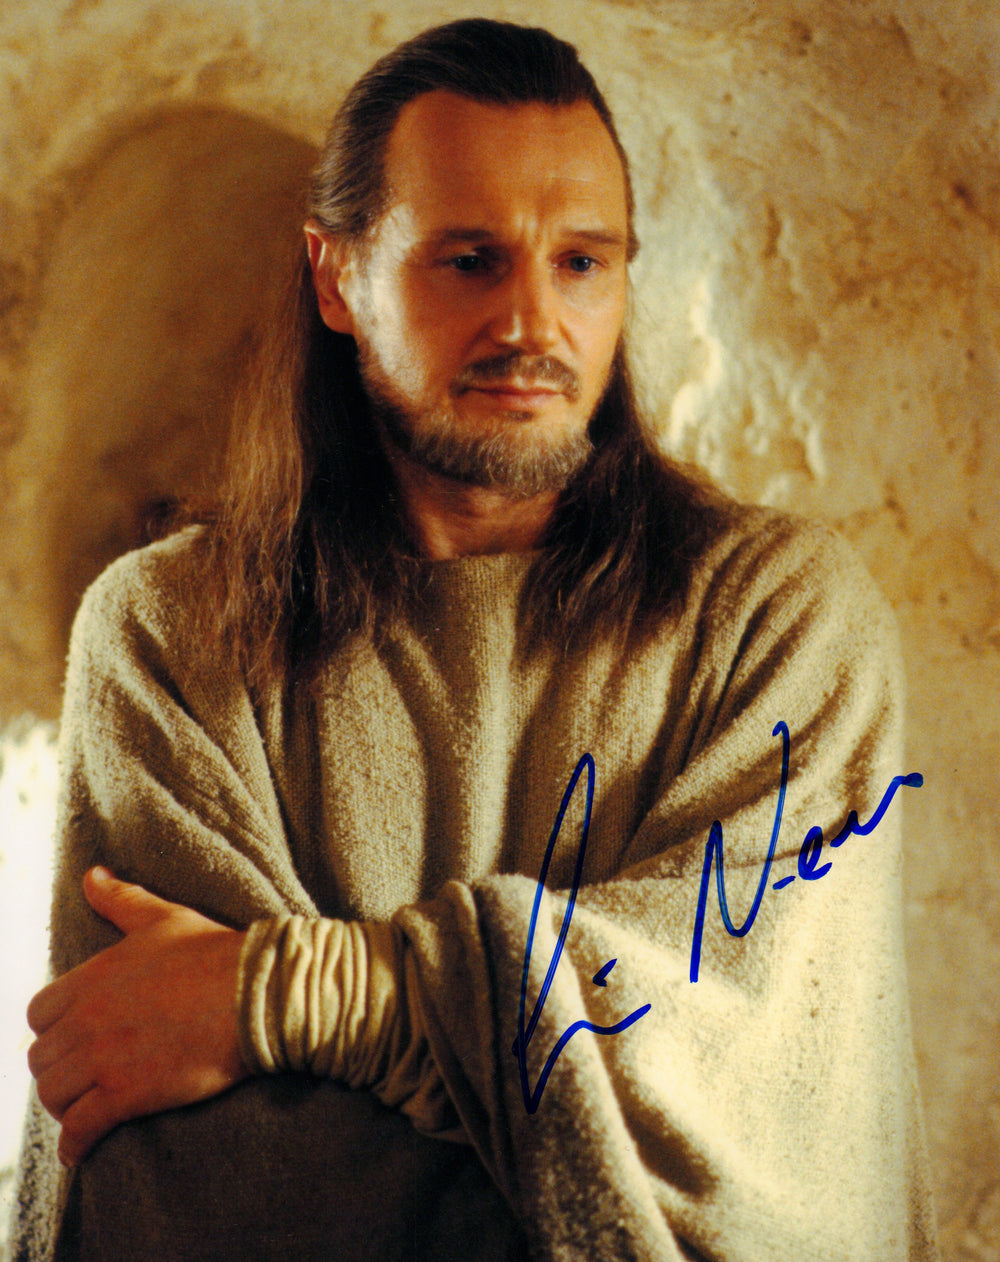 Liam Neeson would return to Star Wars as Qui-Gon Jinn, on one condition